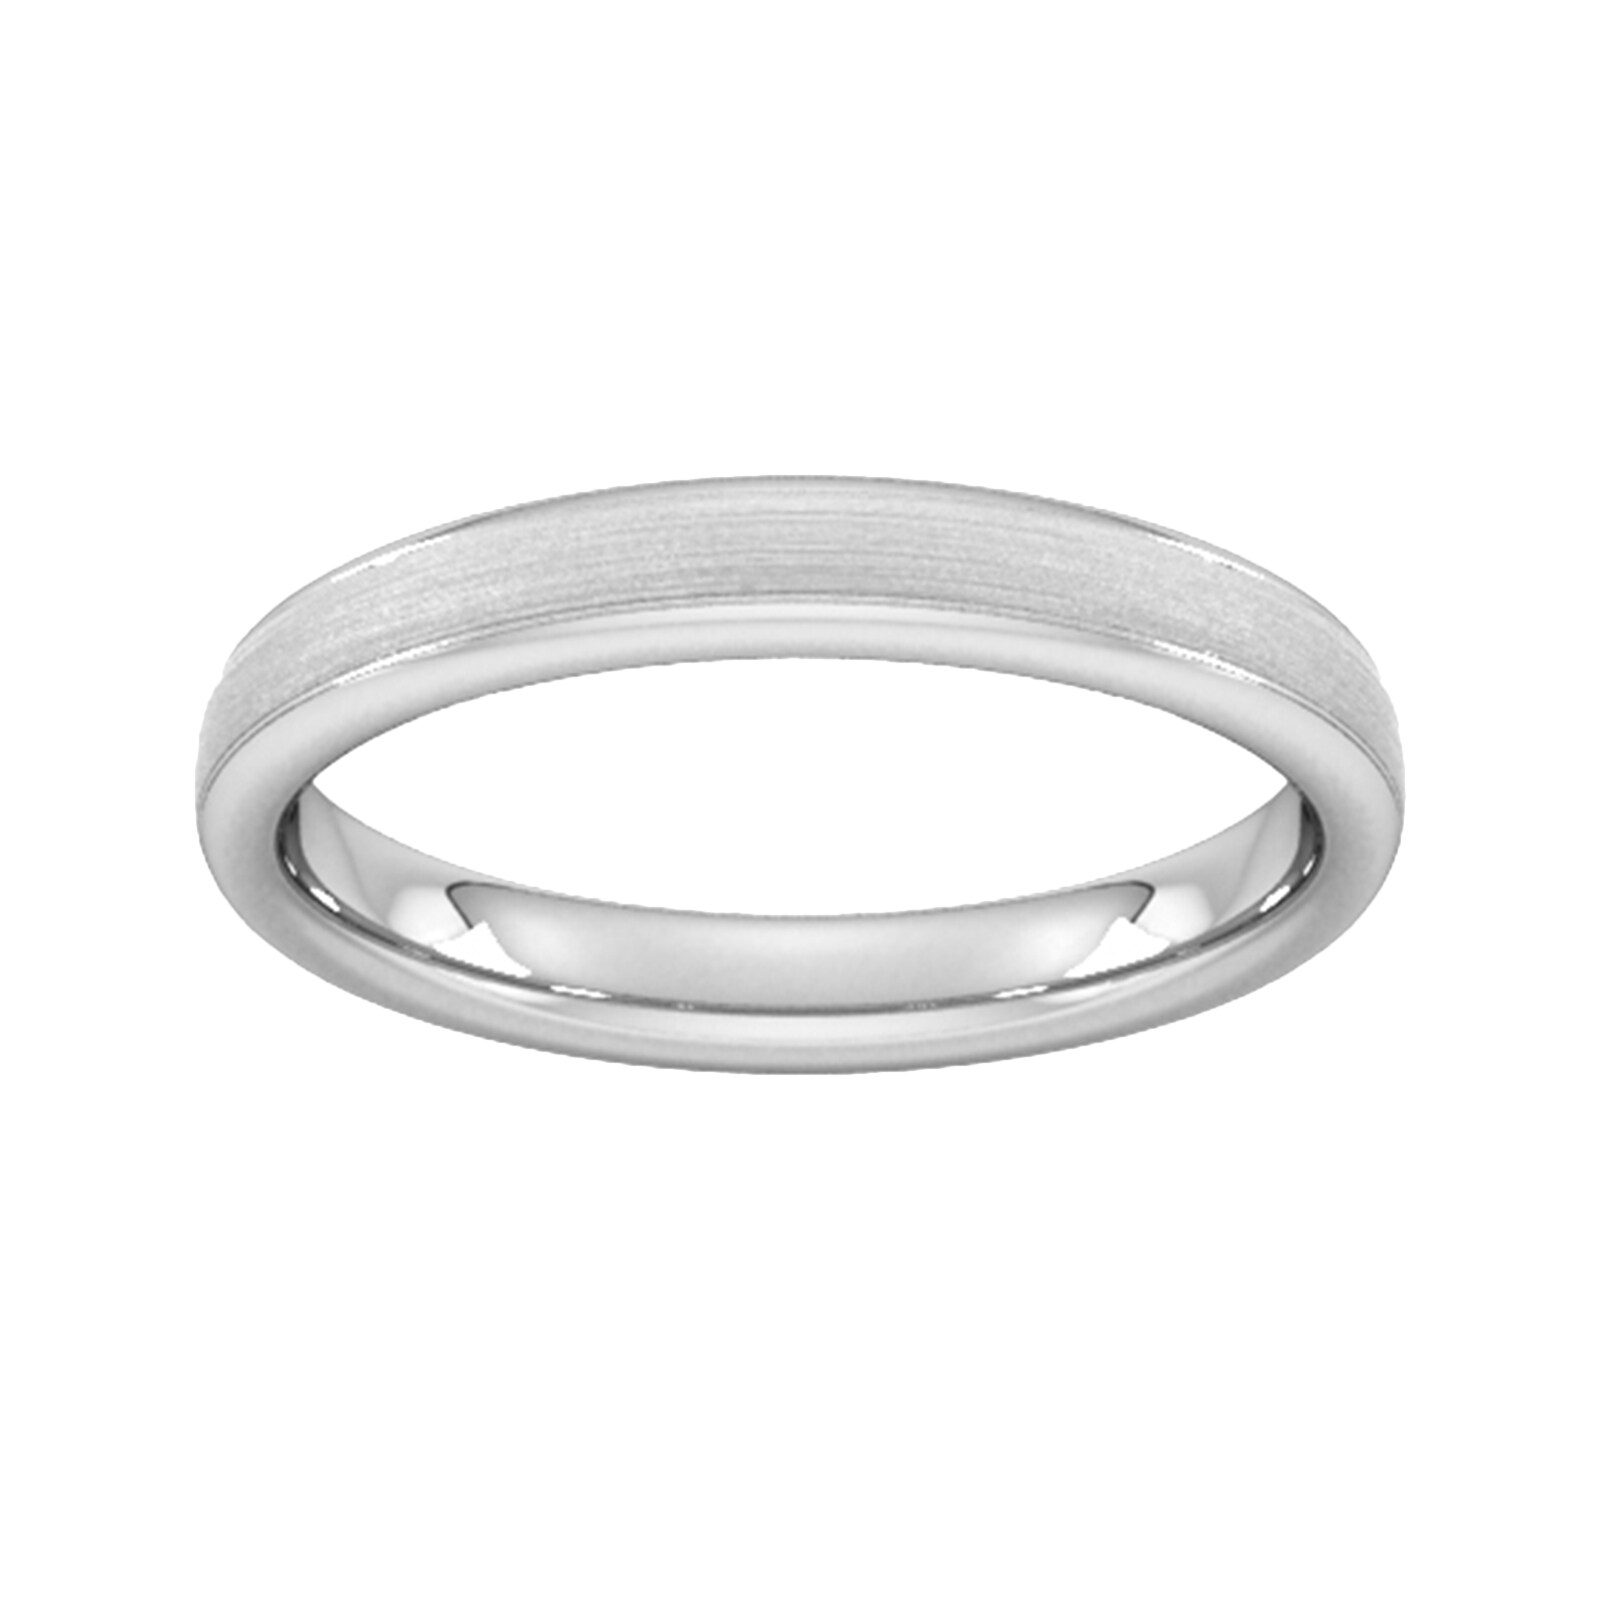 3mm Slight Court Extra Heavy Matt Centre With Grooves Wedding Ring In 18 Carat White Gold - Ring Size Q